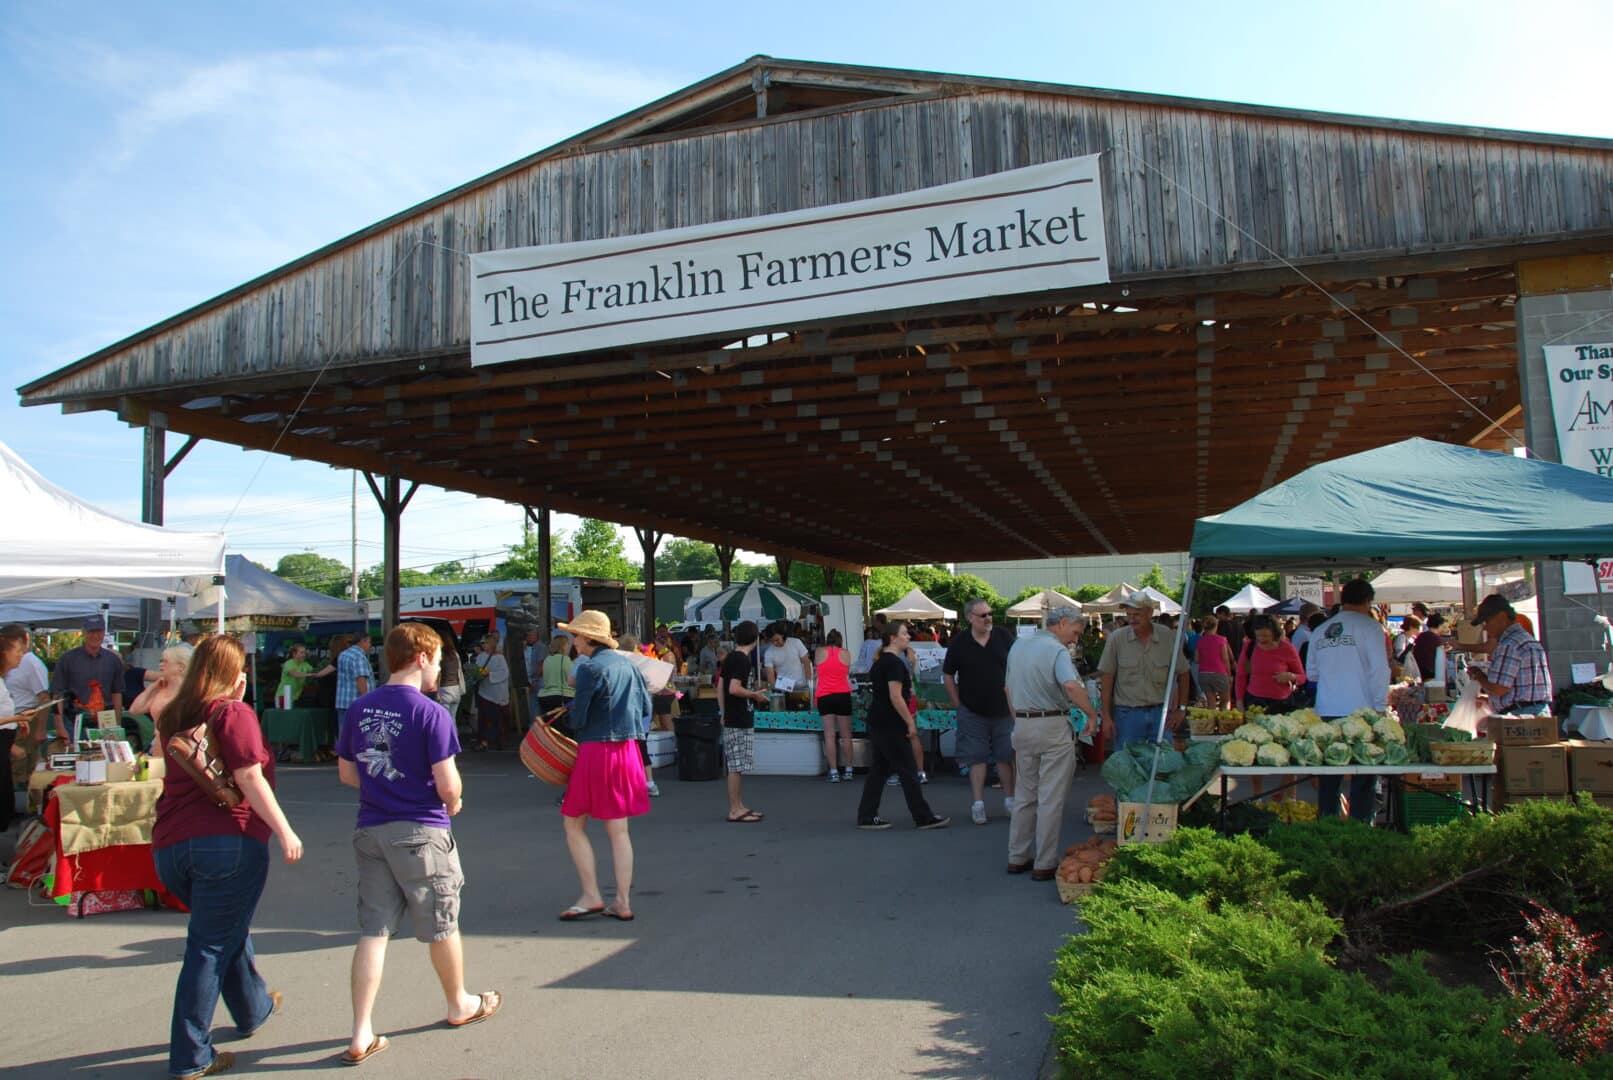 Things to do in downtown Franklin, TN, the Franklin Farmers Market offers shopping for fresh produce, crafts, baked goods, dairy items, meats and so much more!